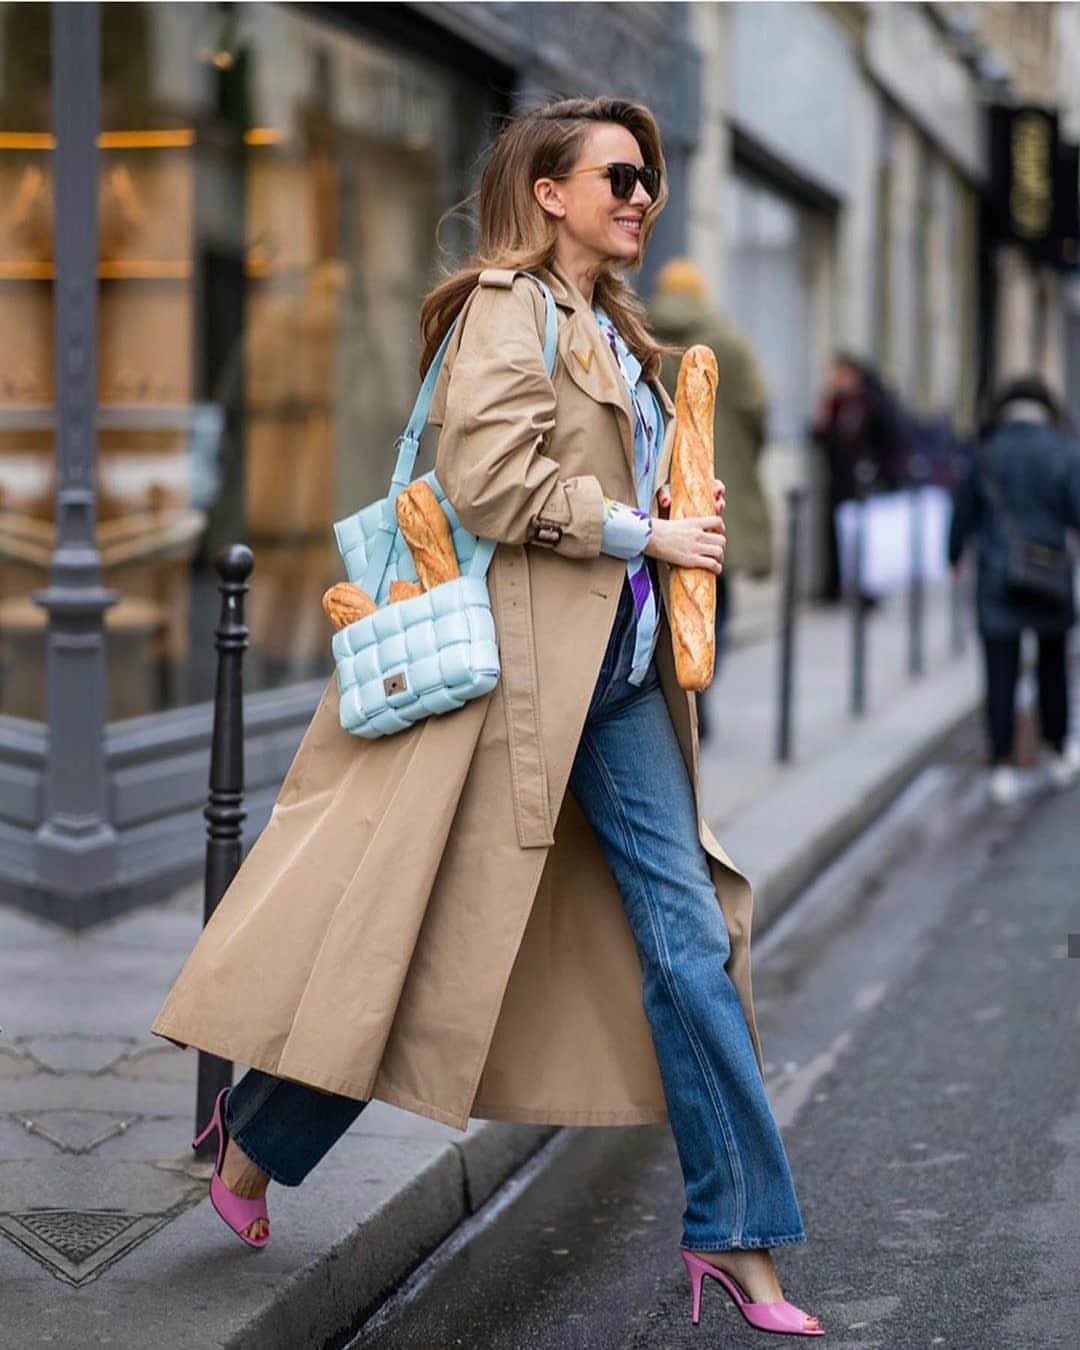 Buon Weekend Principesse! ~ 𝒲𝑒𝑒𝓀𝑒𝓃𝒹 𝐹𝒶𝓋𝑜𝓇𝒾𝓉𝑒𝓈 | Cool Chic Style Fashion